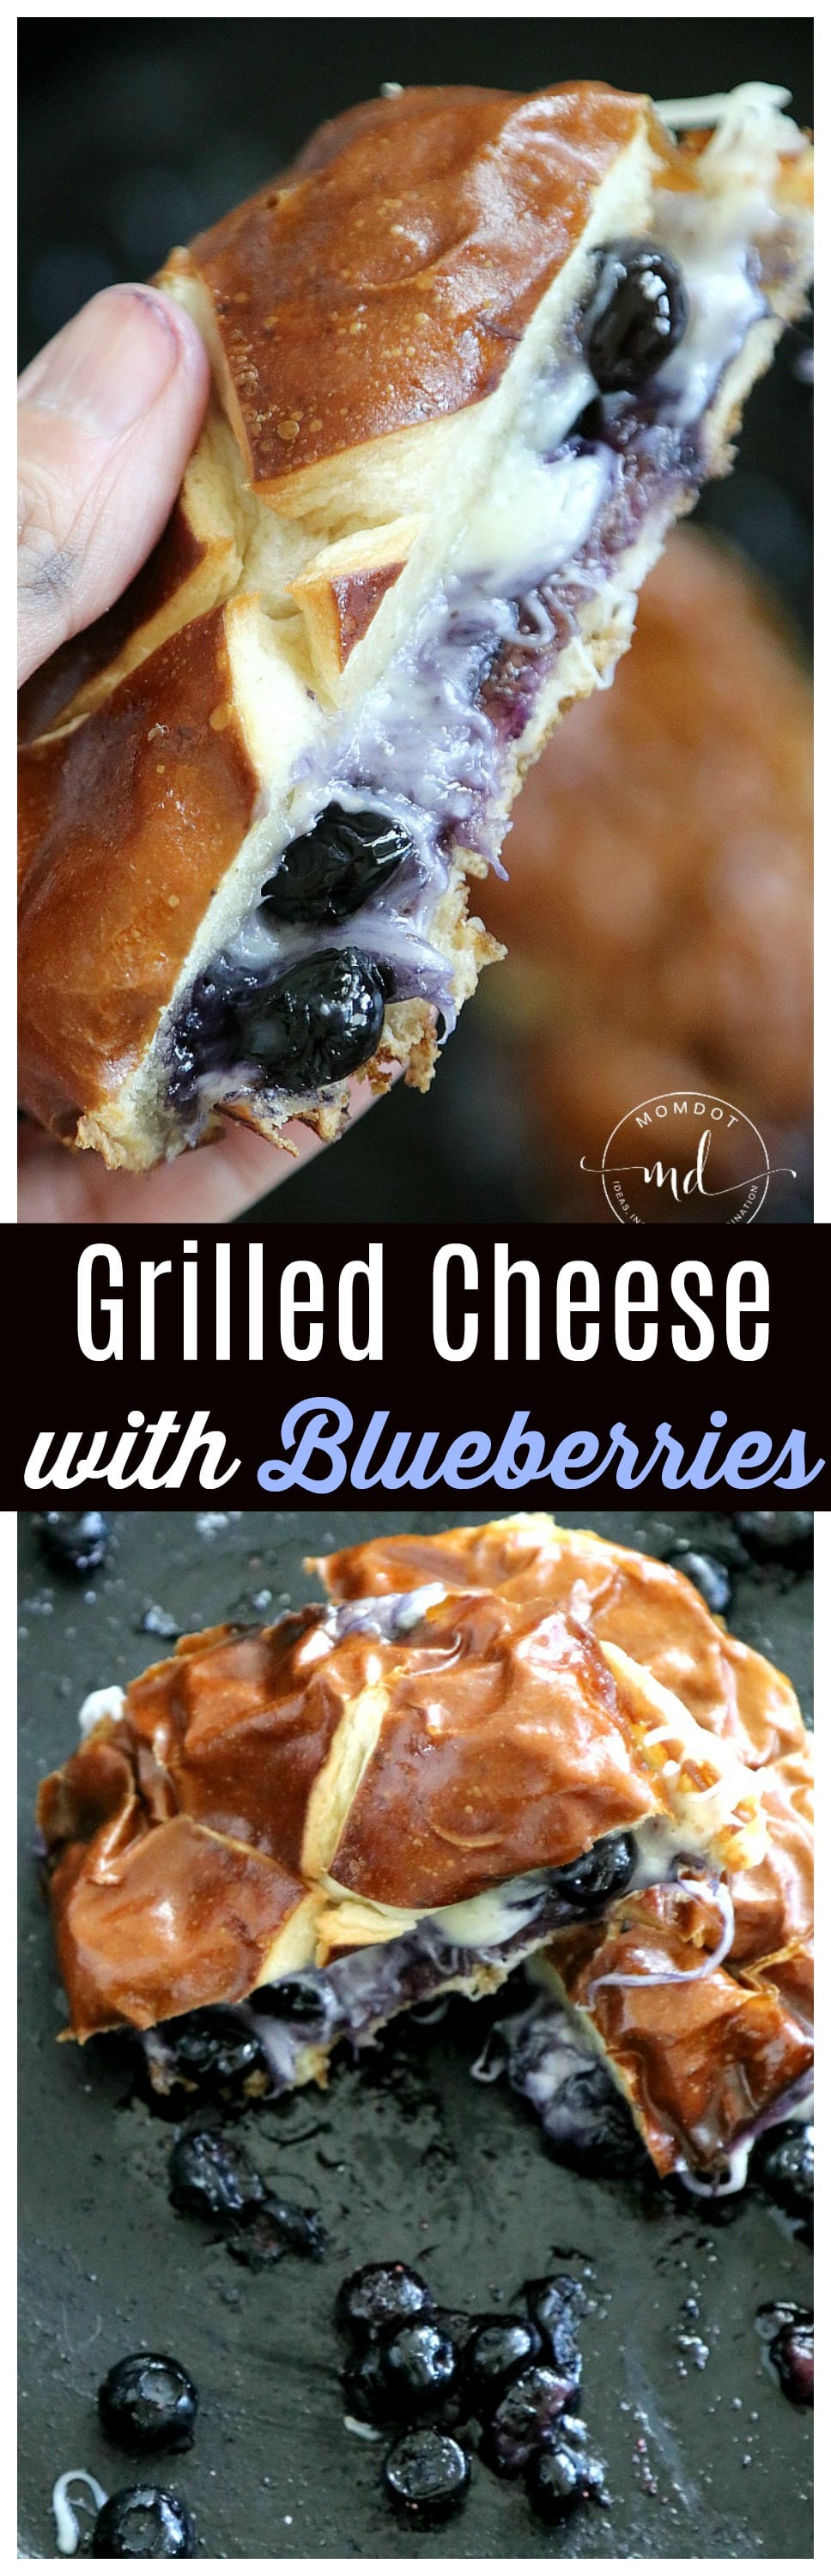 Grilled Cheese with Blueberries, a delicious alternative to a traditional lunch that kids and adults will both love to make and eat